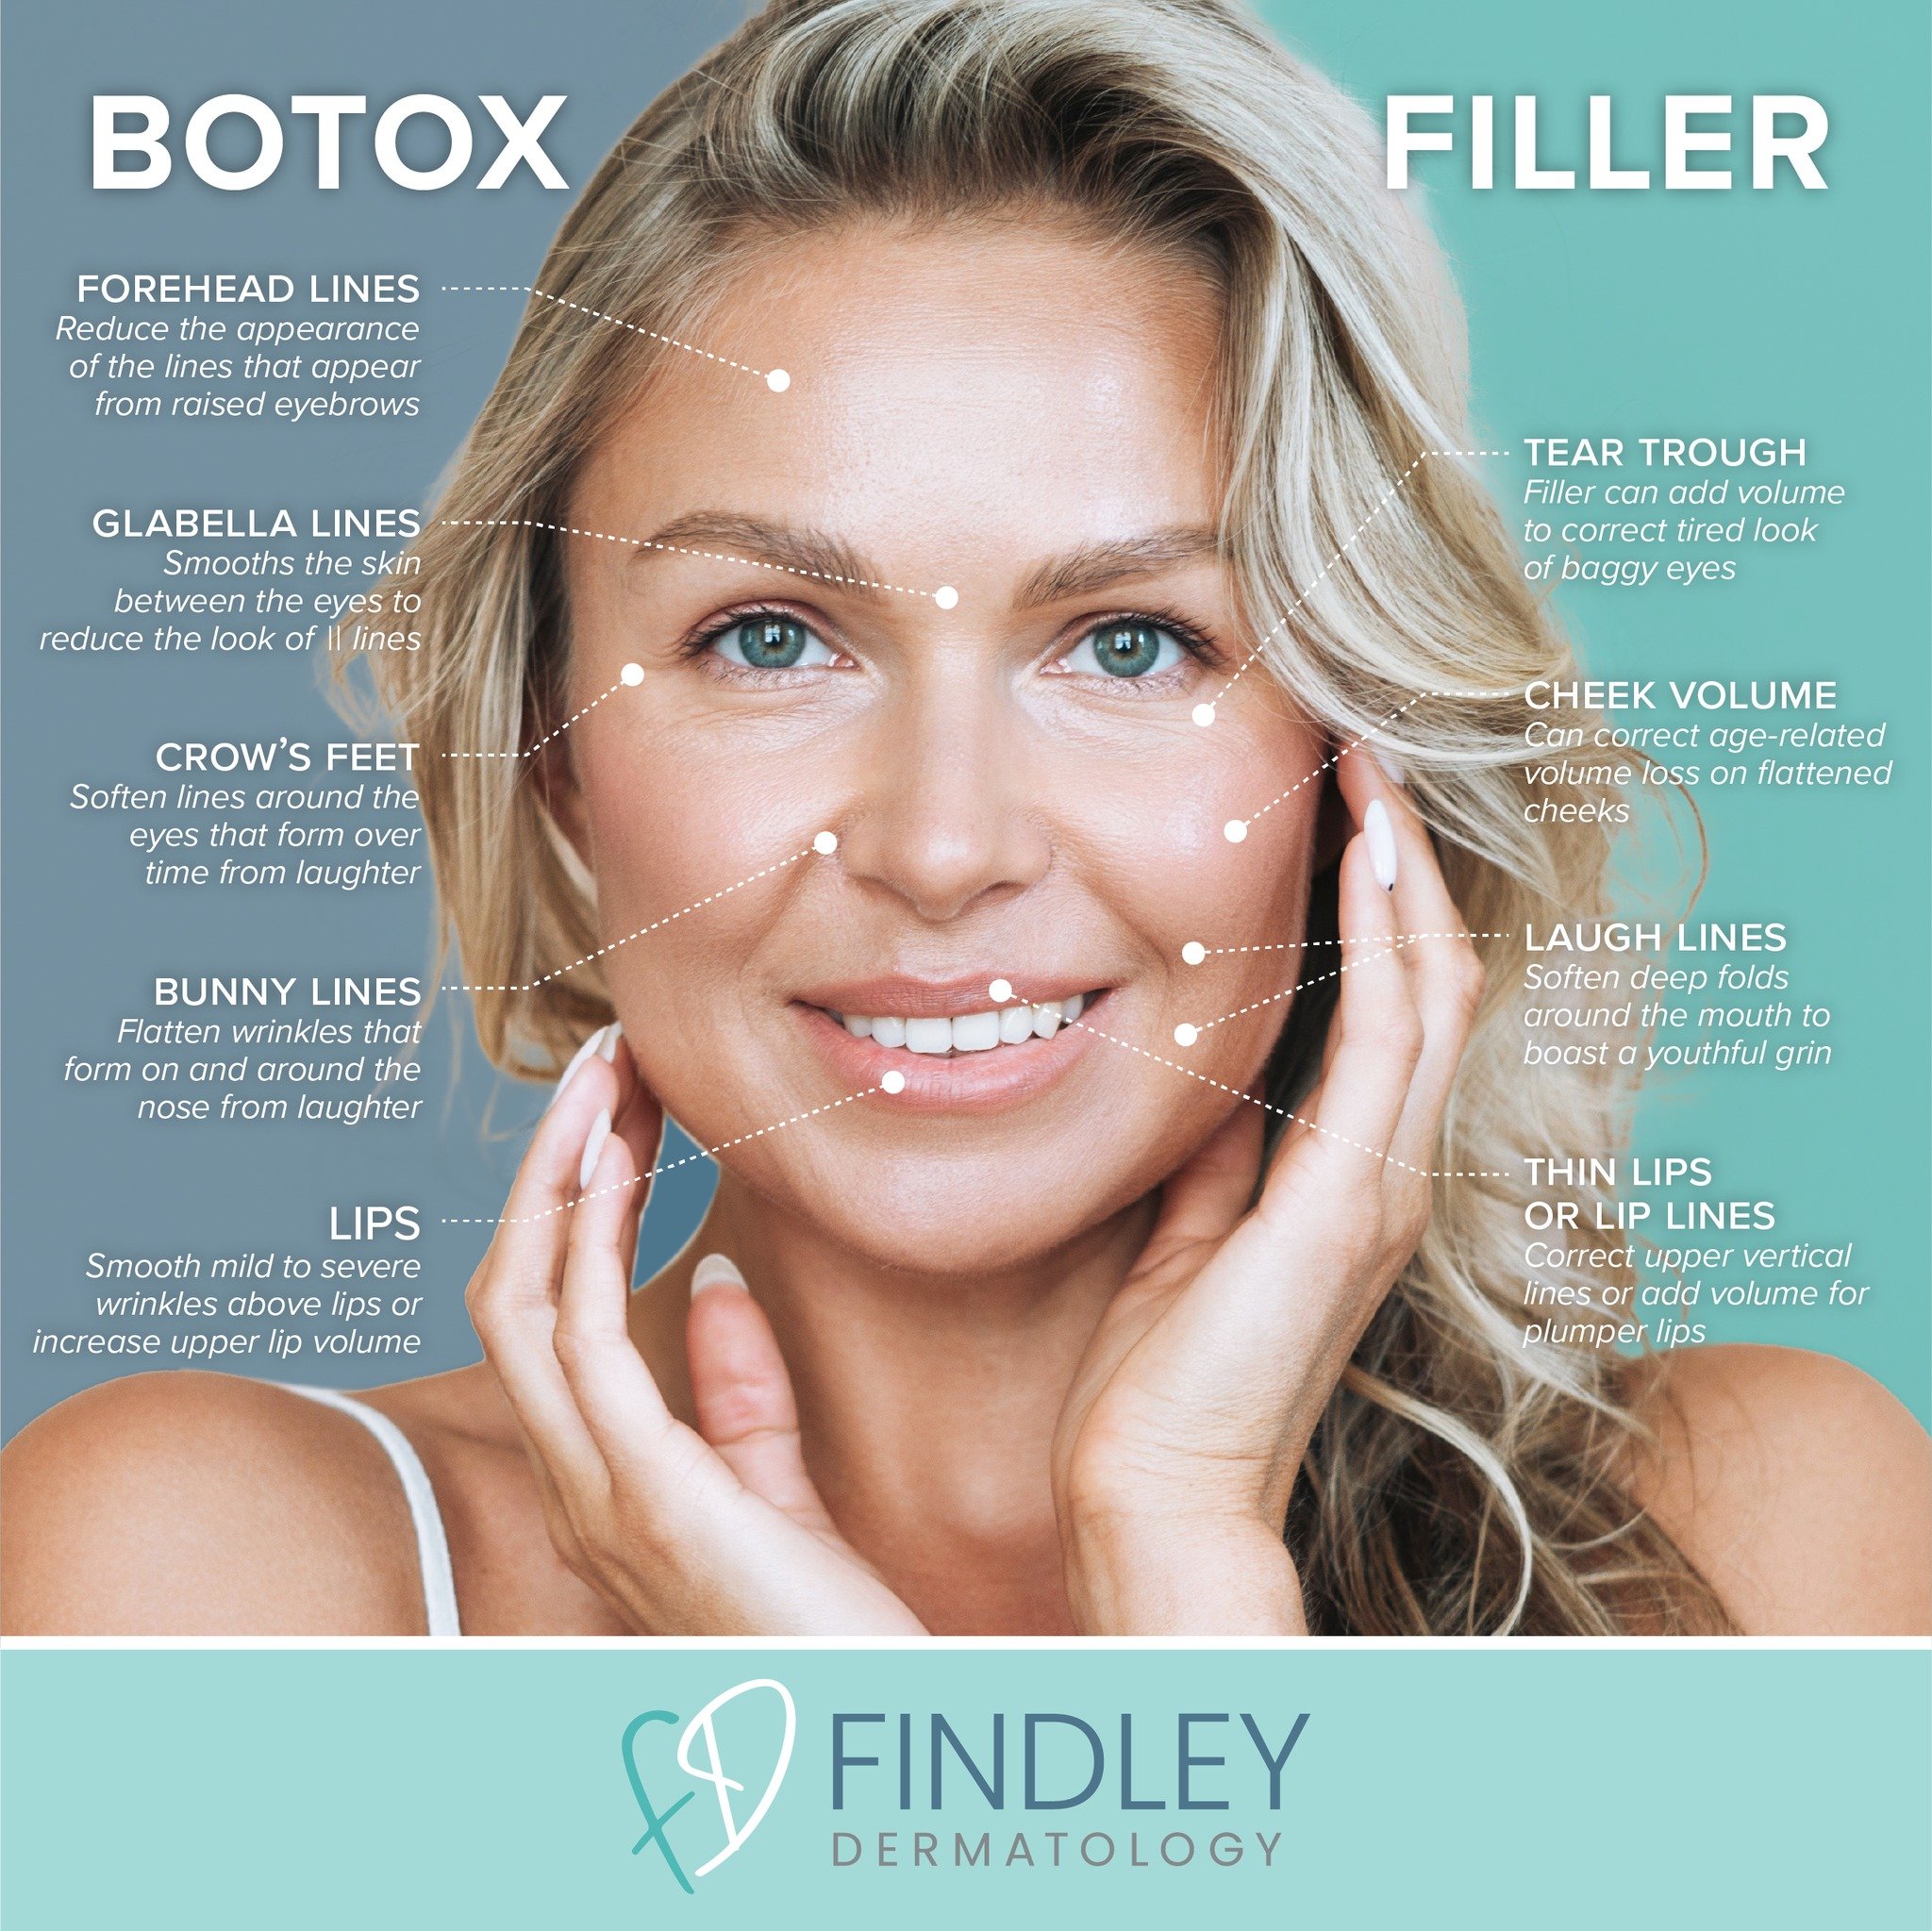 The choice between Botox and fillers depends on your specific aesthetic goals. Botox may be the ideal solution if your primary concern is reducing the appearance of expression lines. On the other hand, if you're looking to restore volume and enhance 